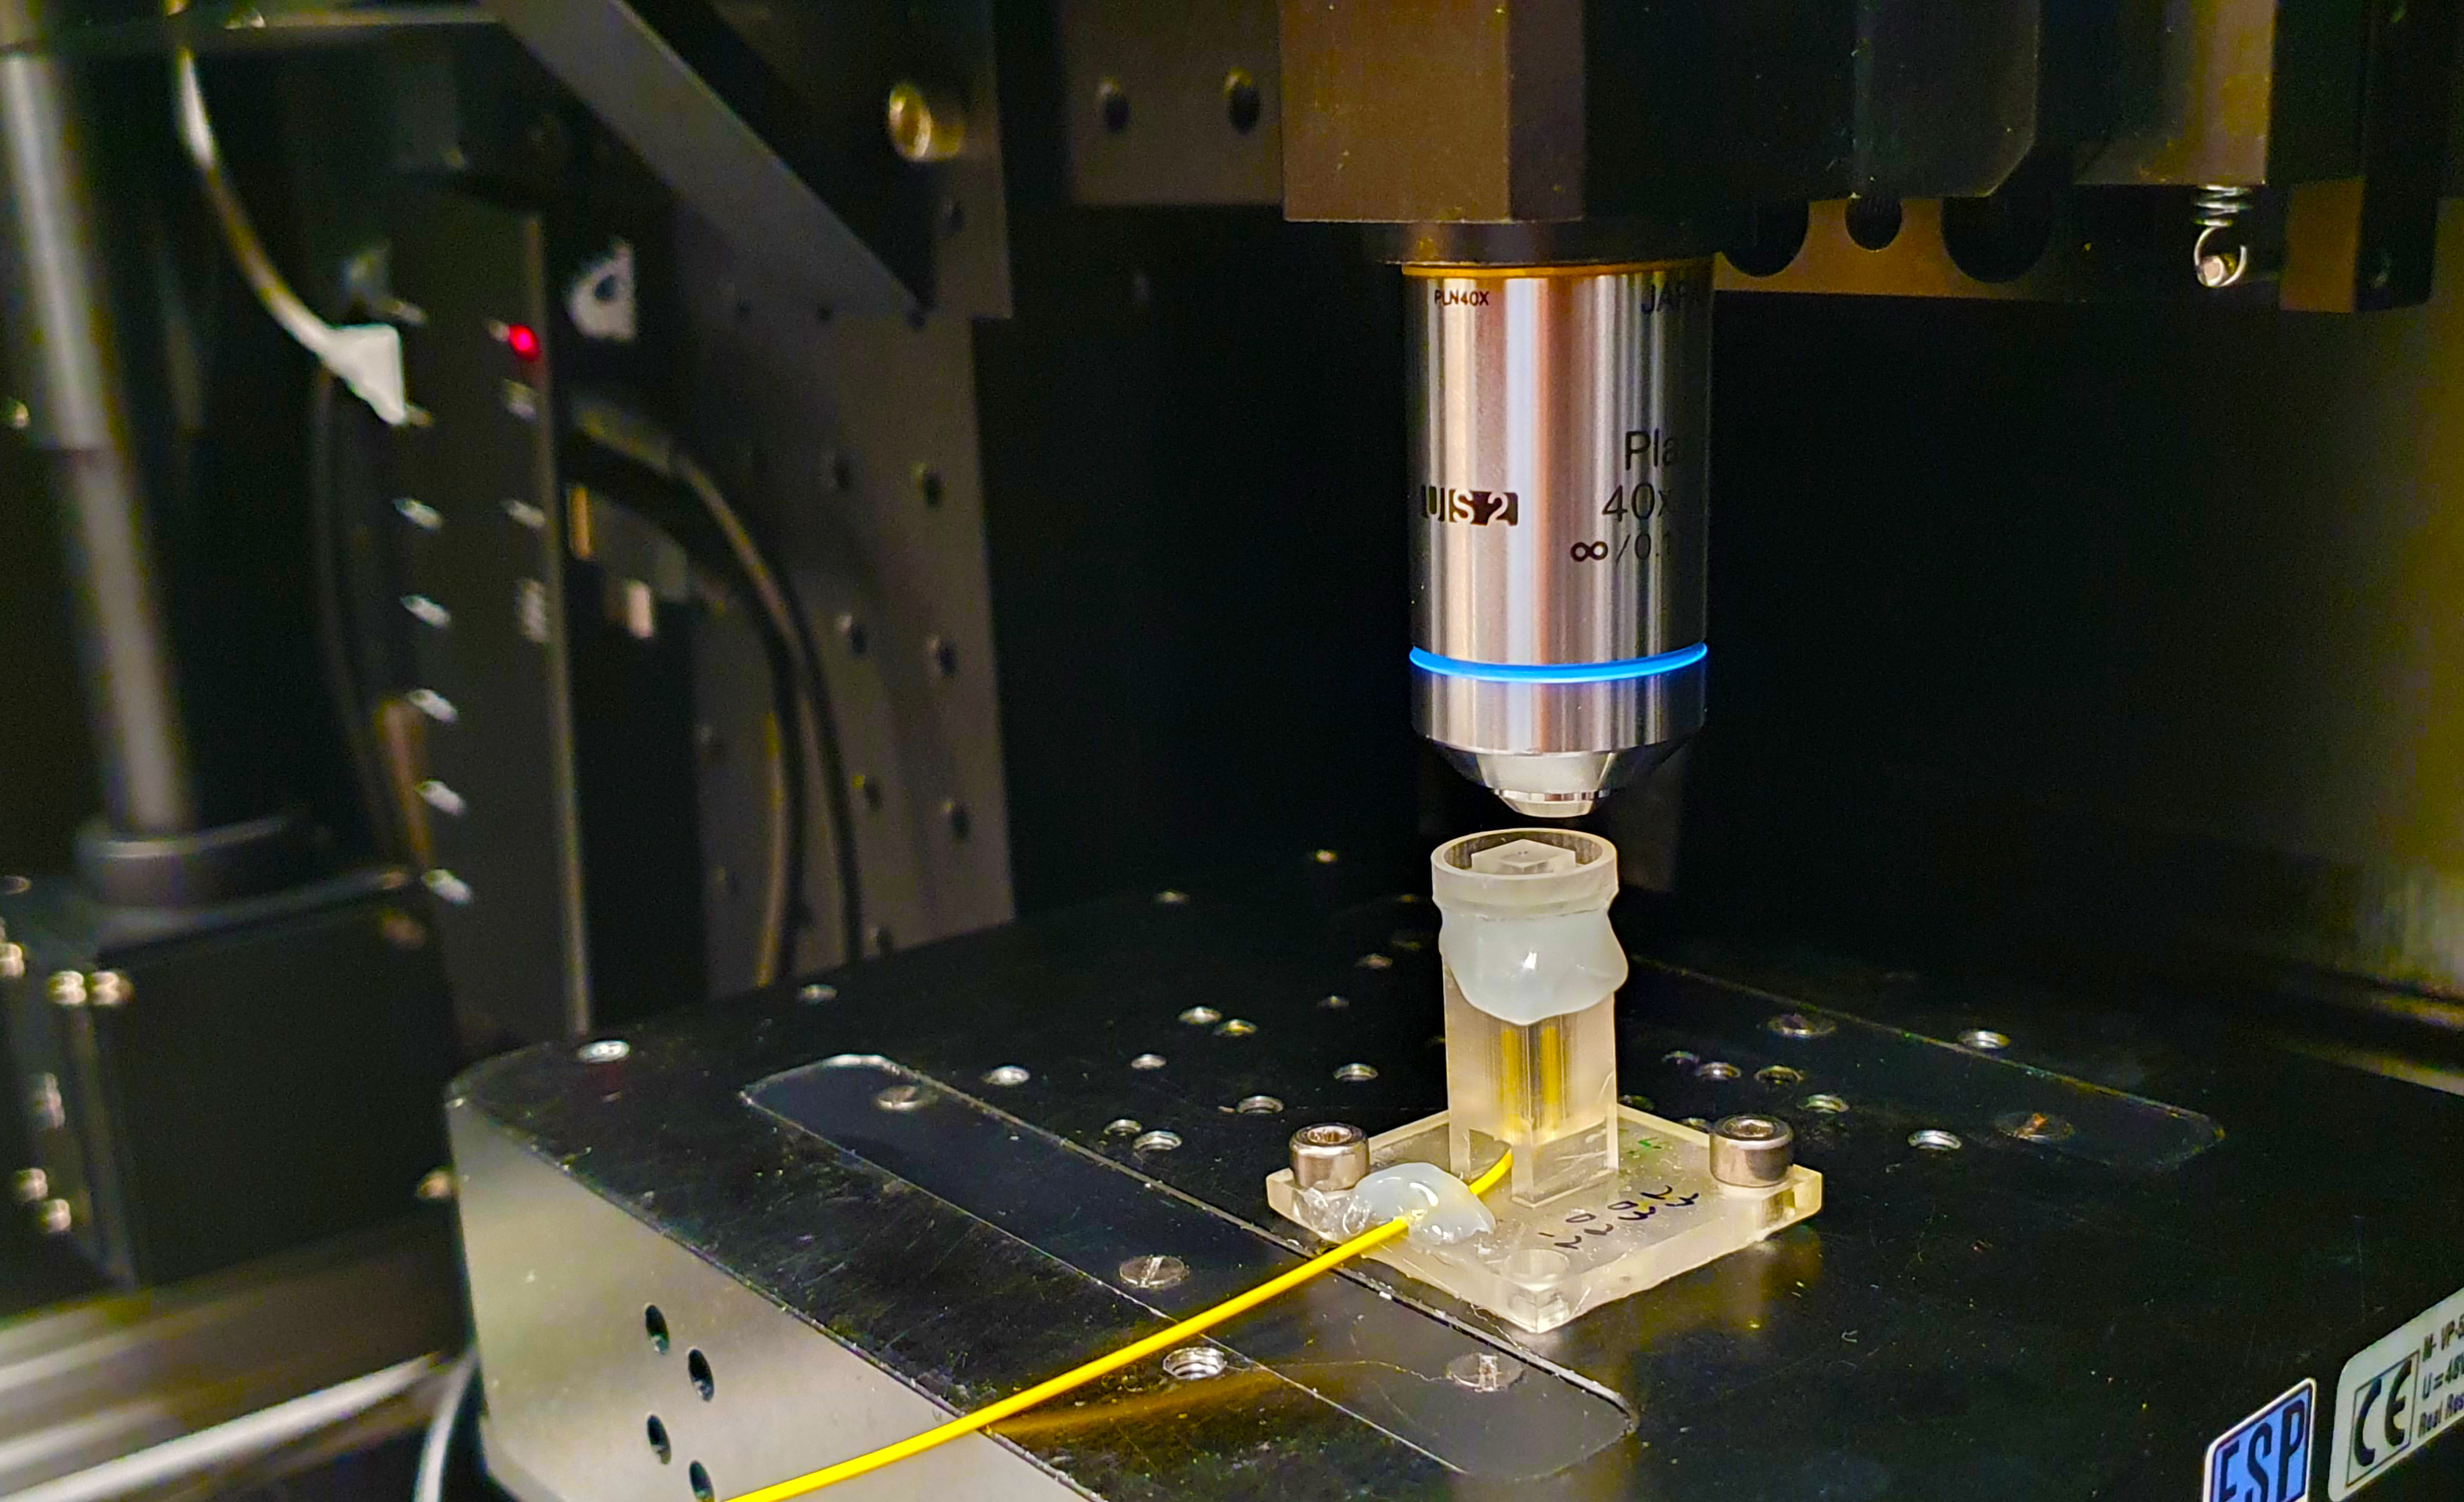 An optical fiber cable is set up on a 3D printer